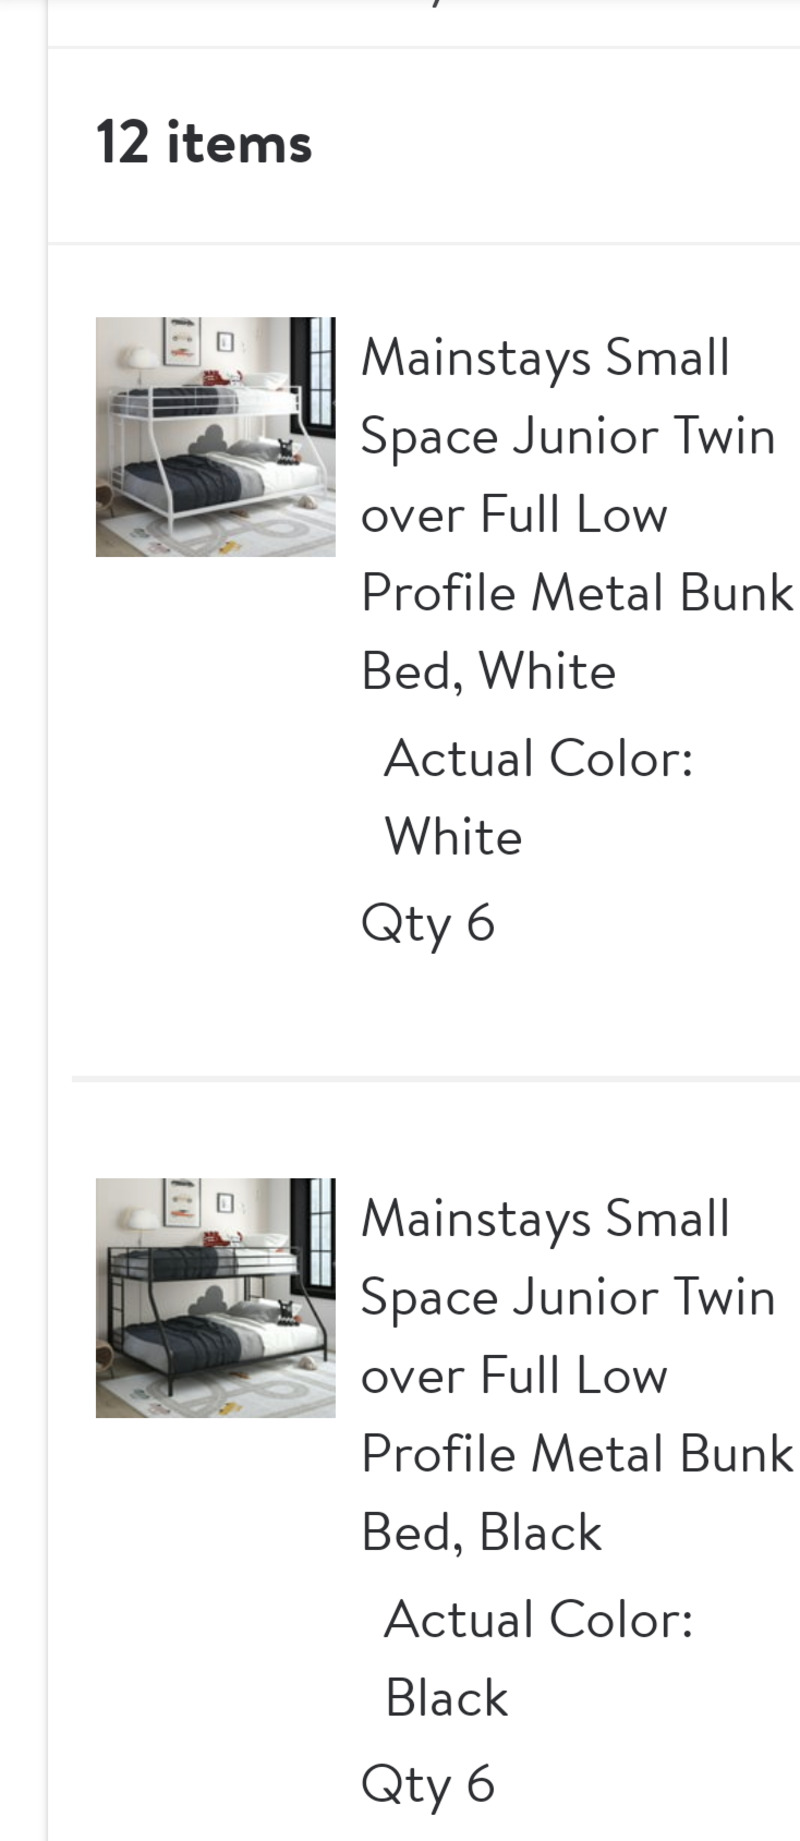 Bunk bed order for the bunkhouses B2 and B3.